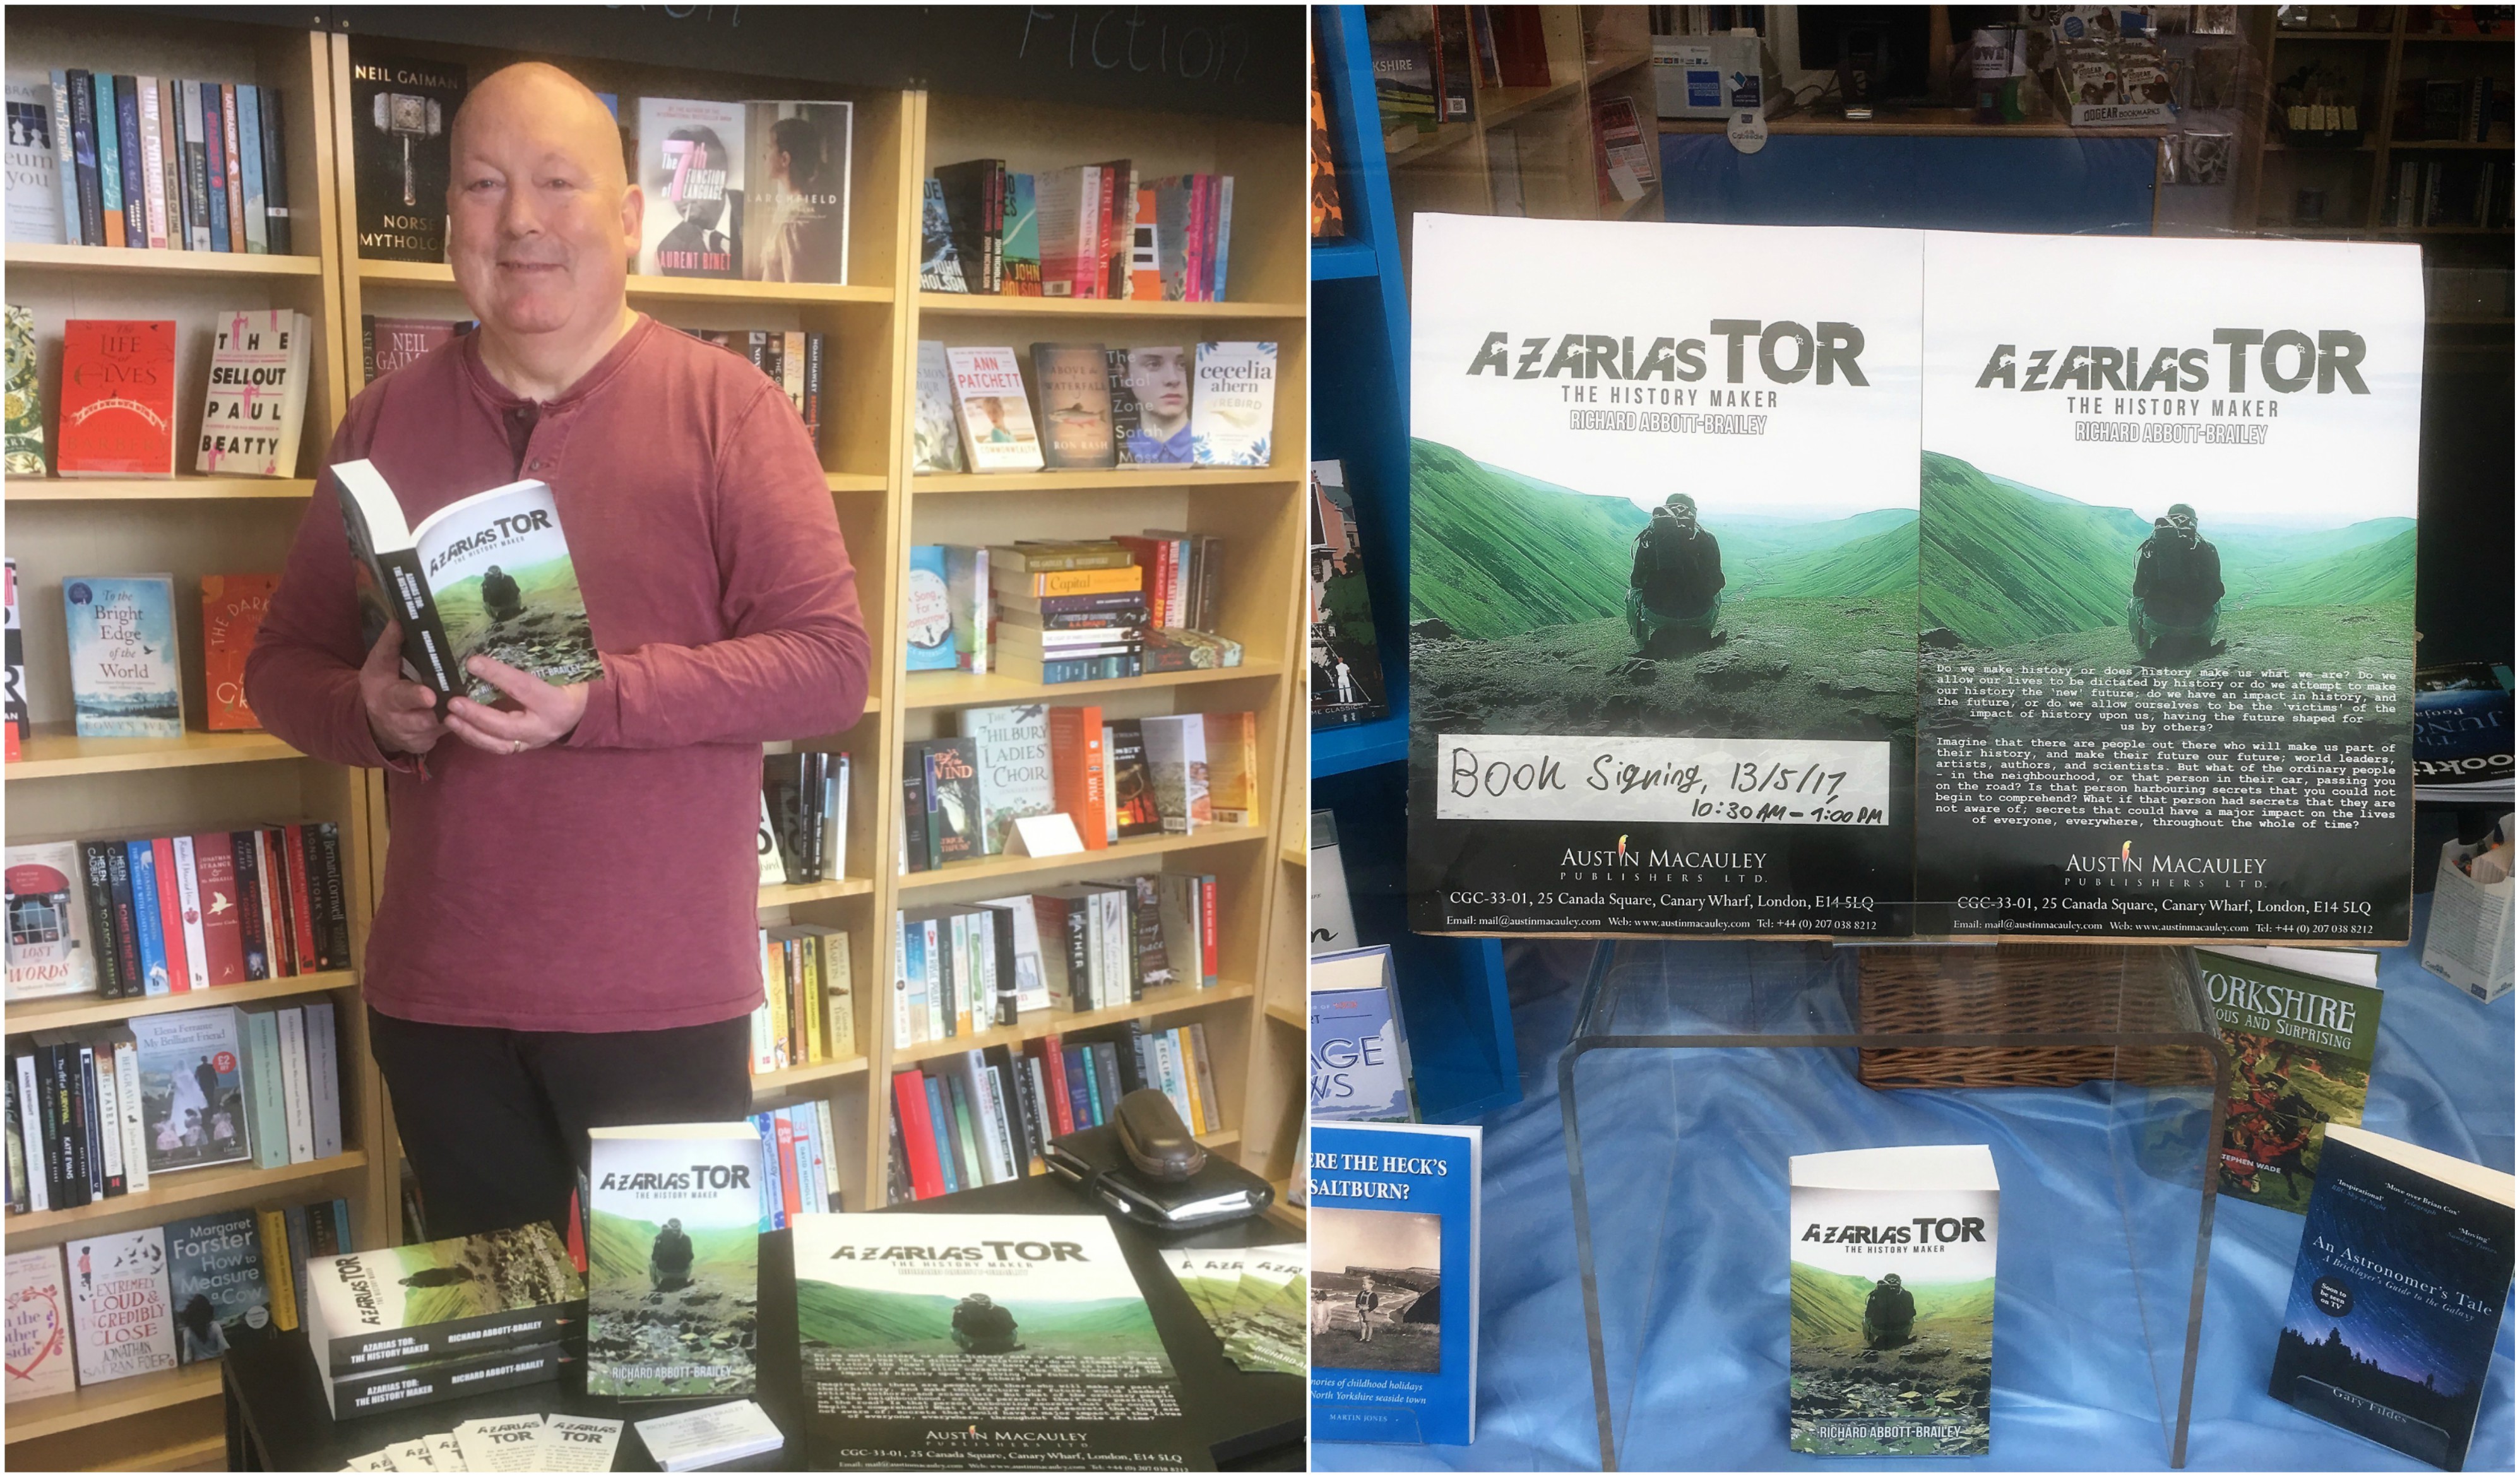 Richard Abbott-Brailey's book signing event at The Book Corner was a great success